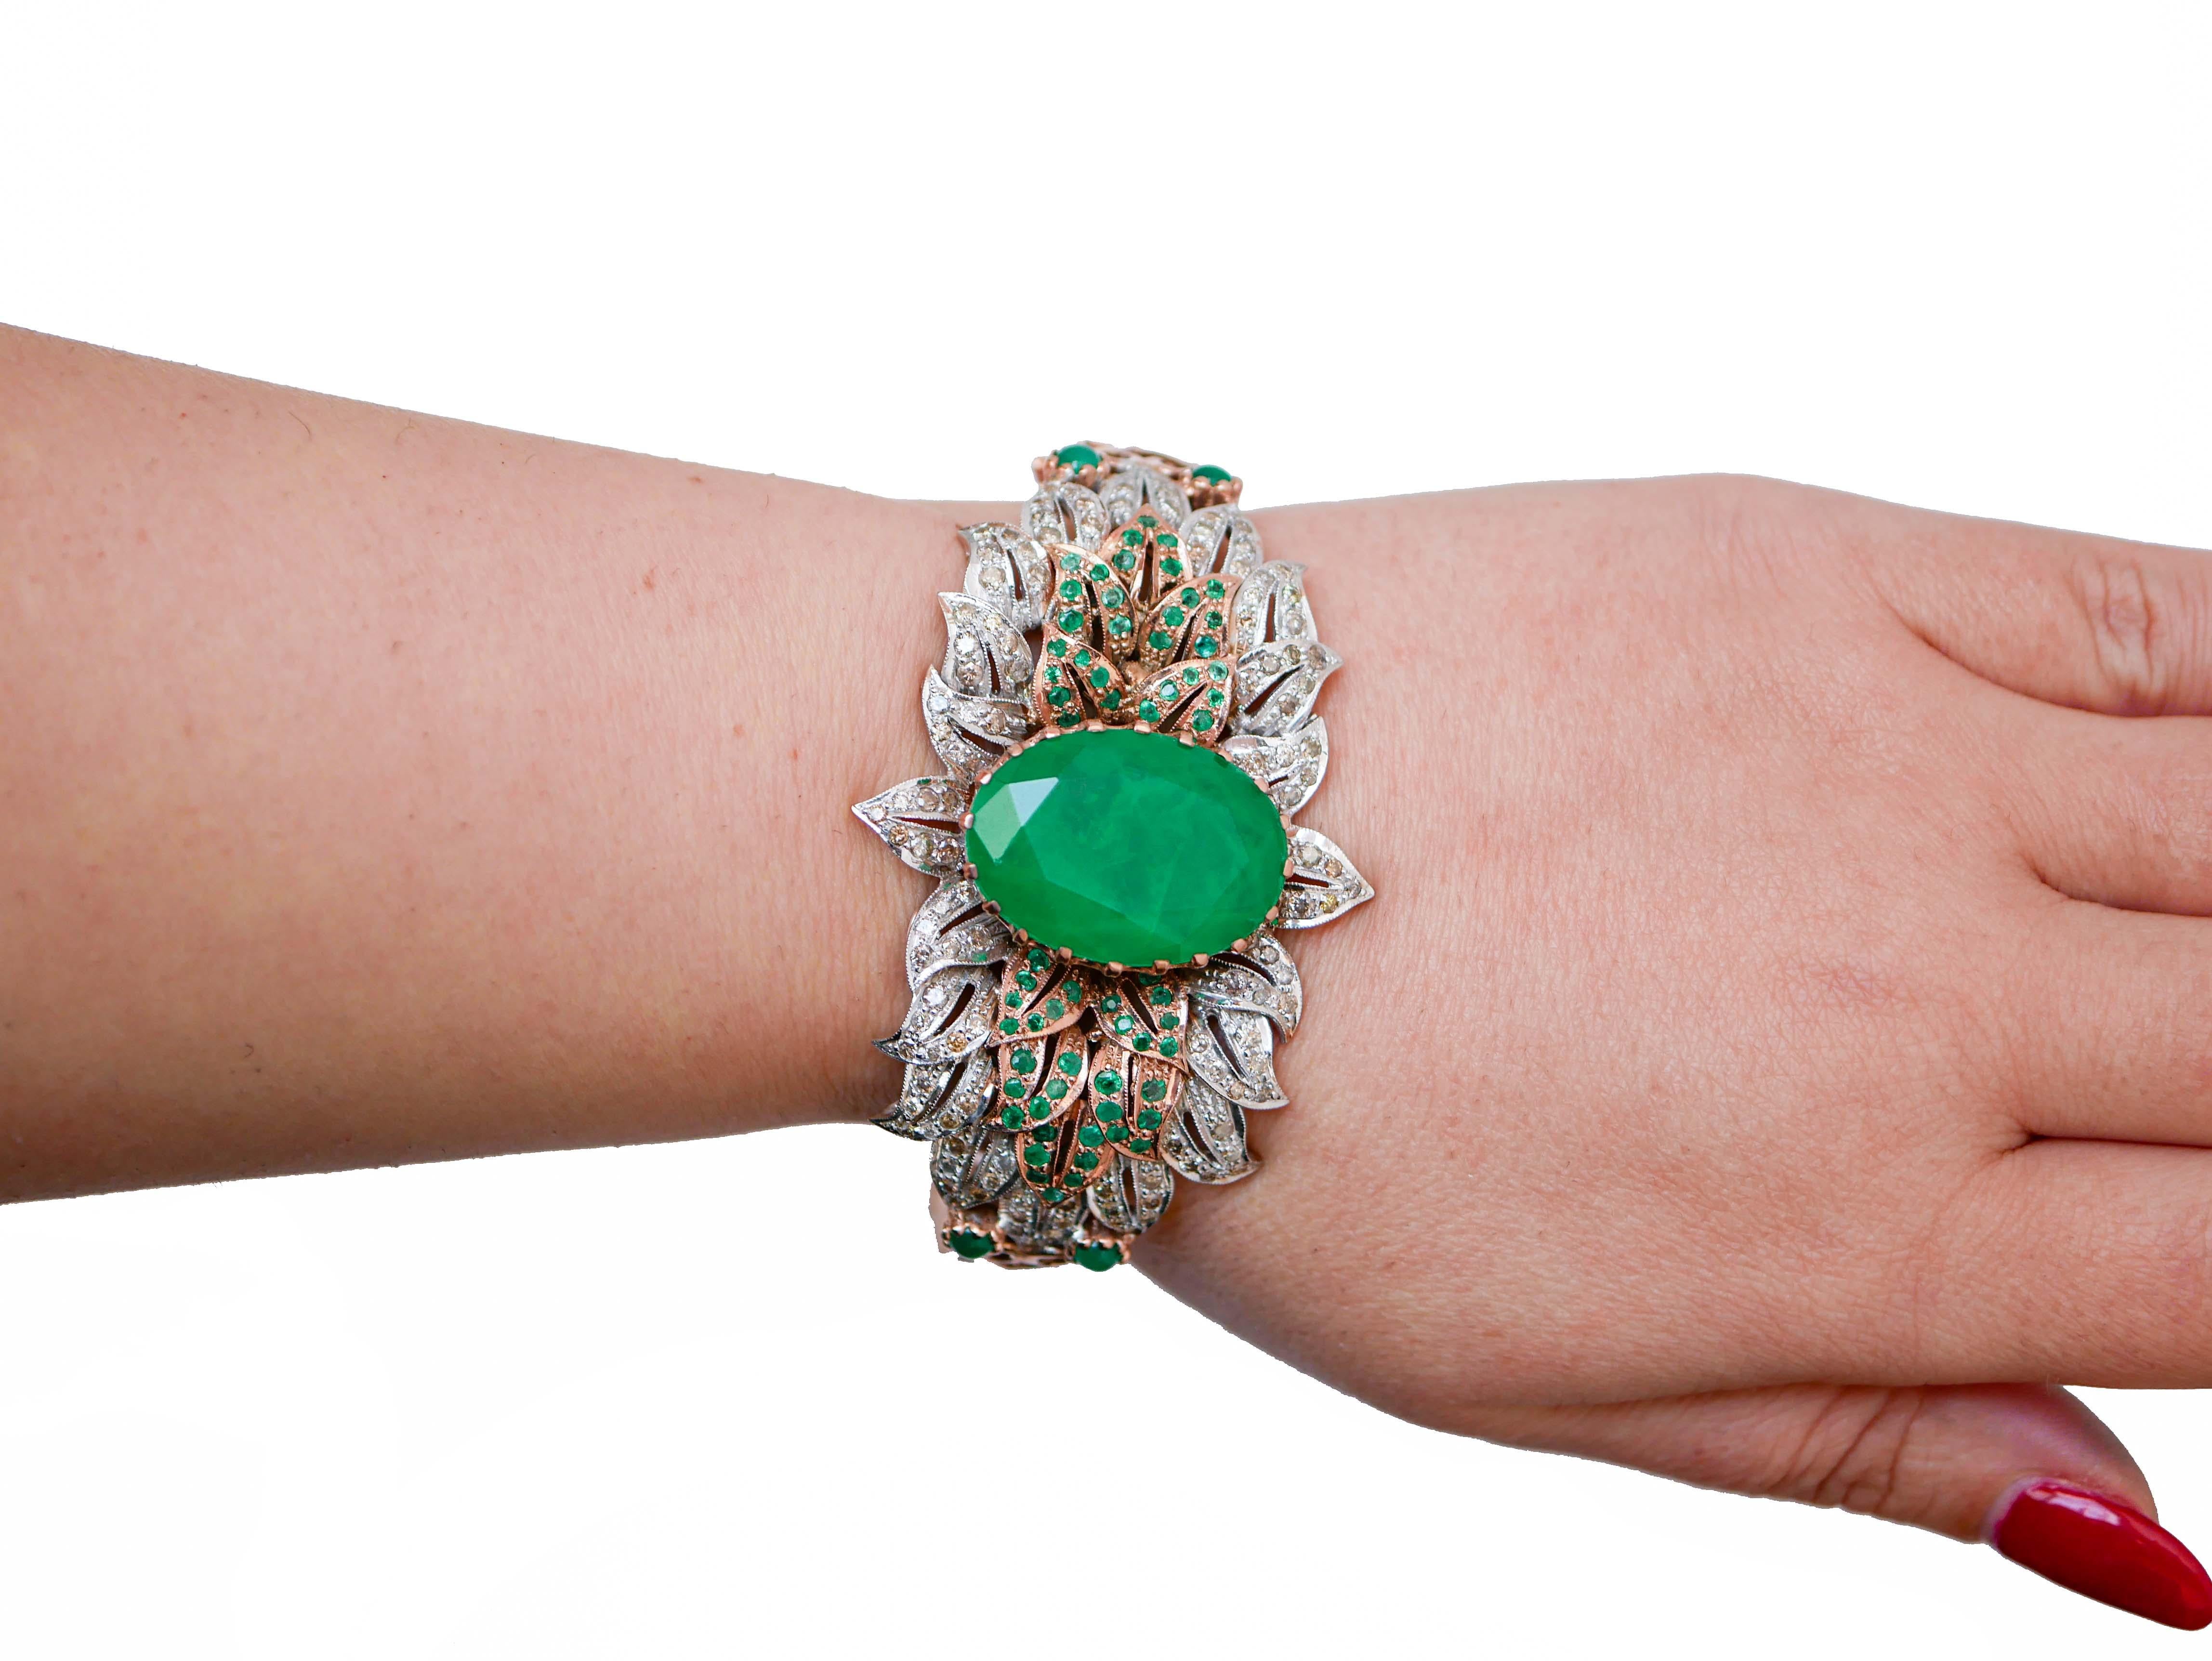 Mixed Cut Stone, Green Agate, Emeralds, Diamonds, Rose Gold and Silver Bracelet. For Sale